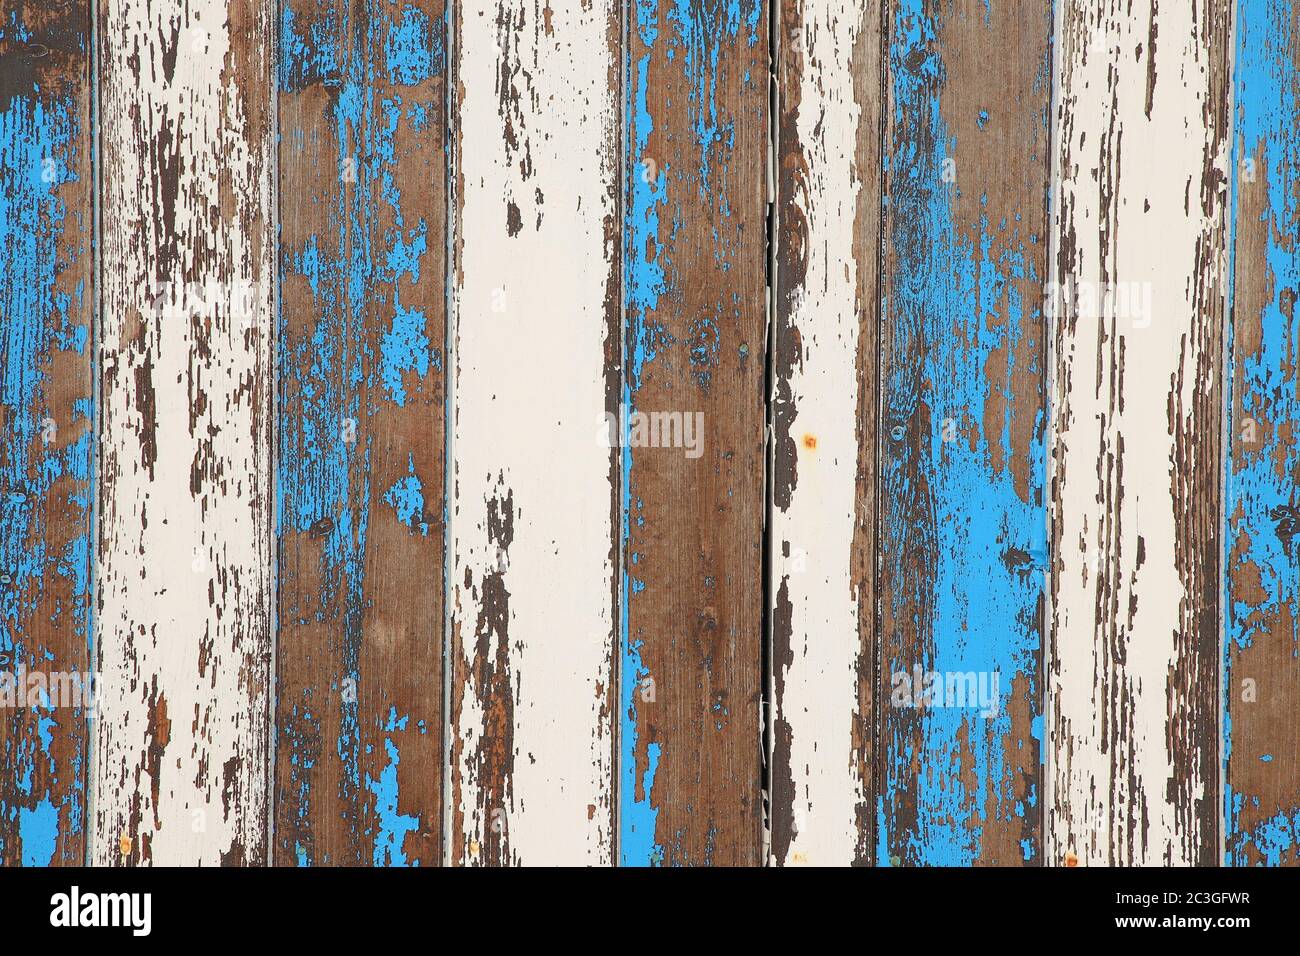 old wooden panel backdrop of paint peeling off surfaces Stock Photo